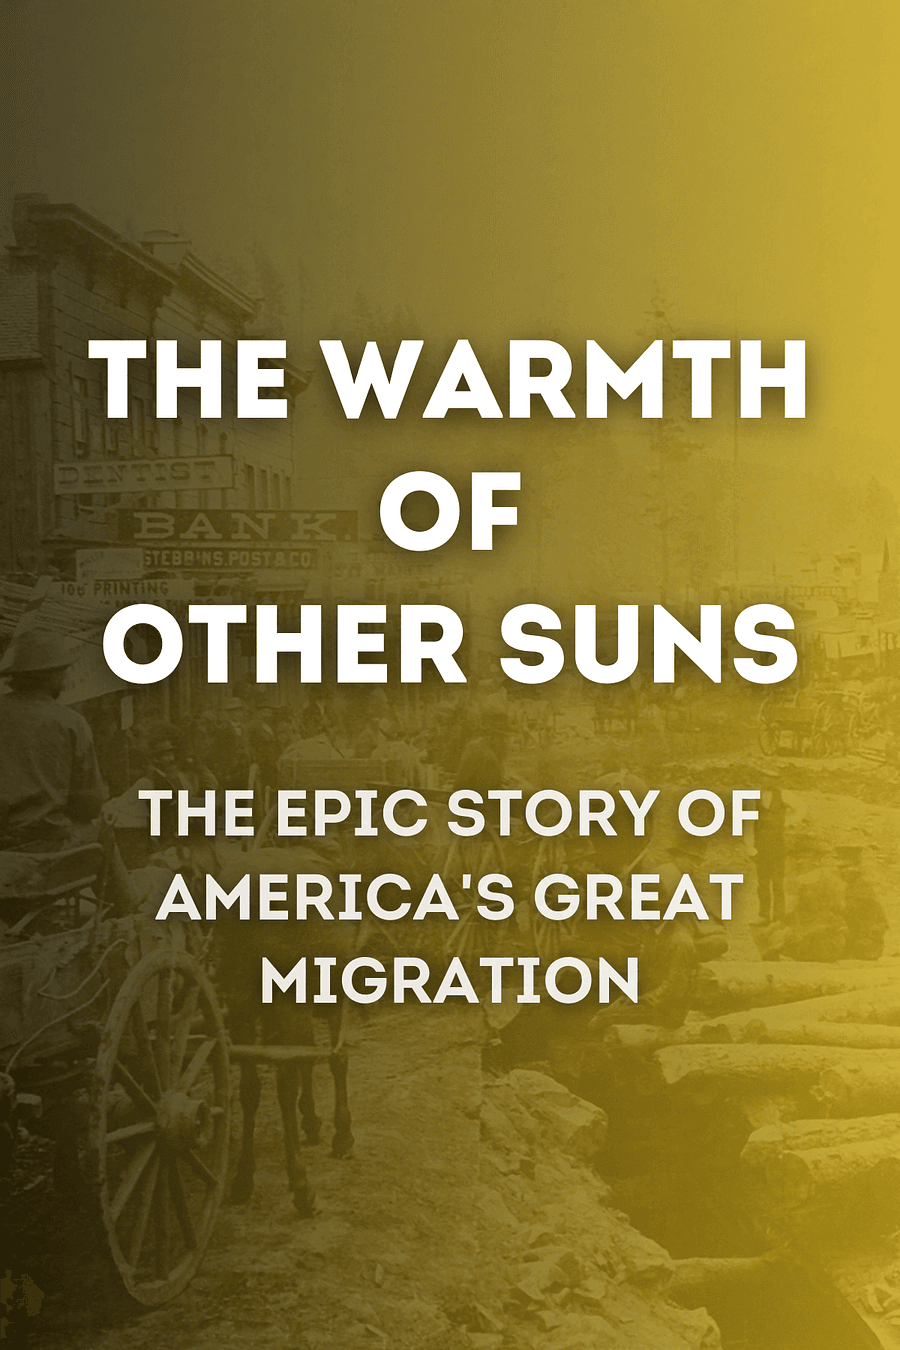 The Warmth of Other Suns by Isabel Wilkerson - Book Summary